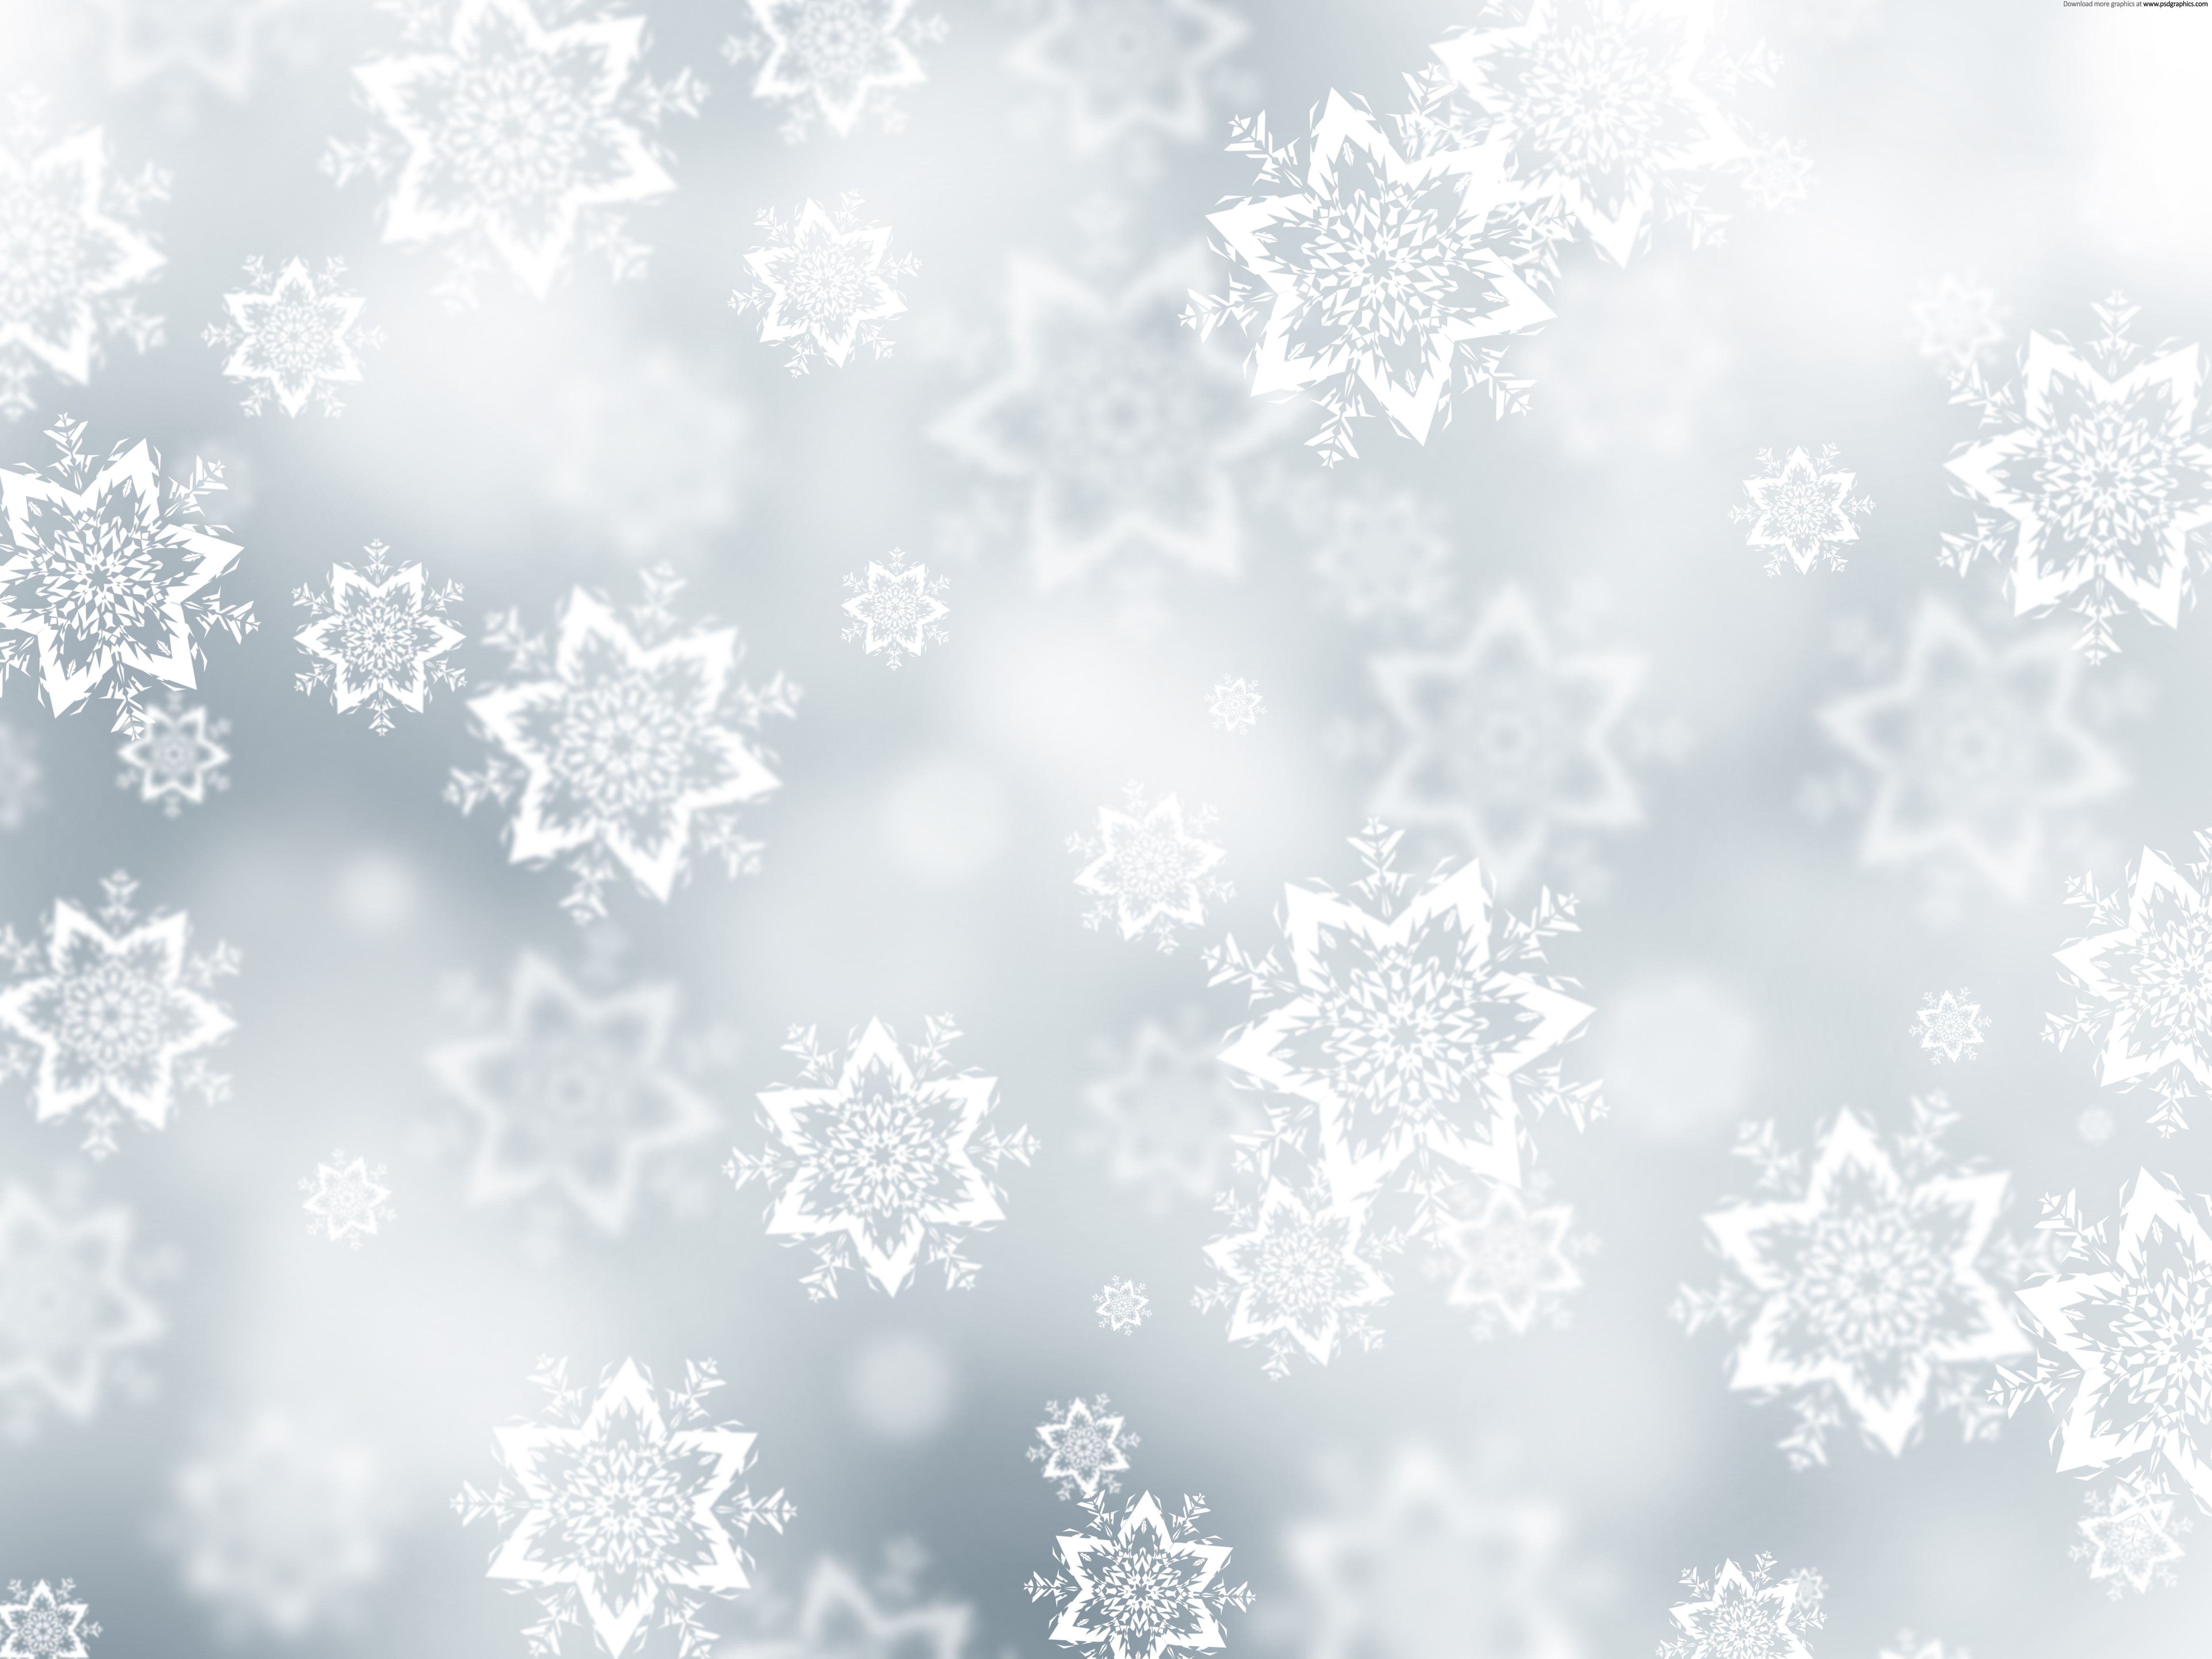 Christmas Snow Backgrounds Images amp Pictures   Becuo